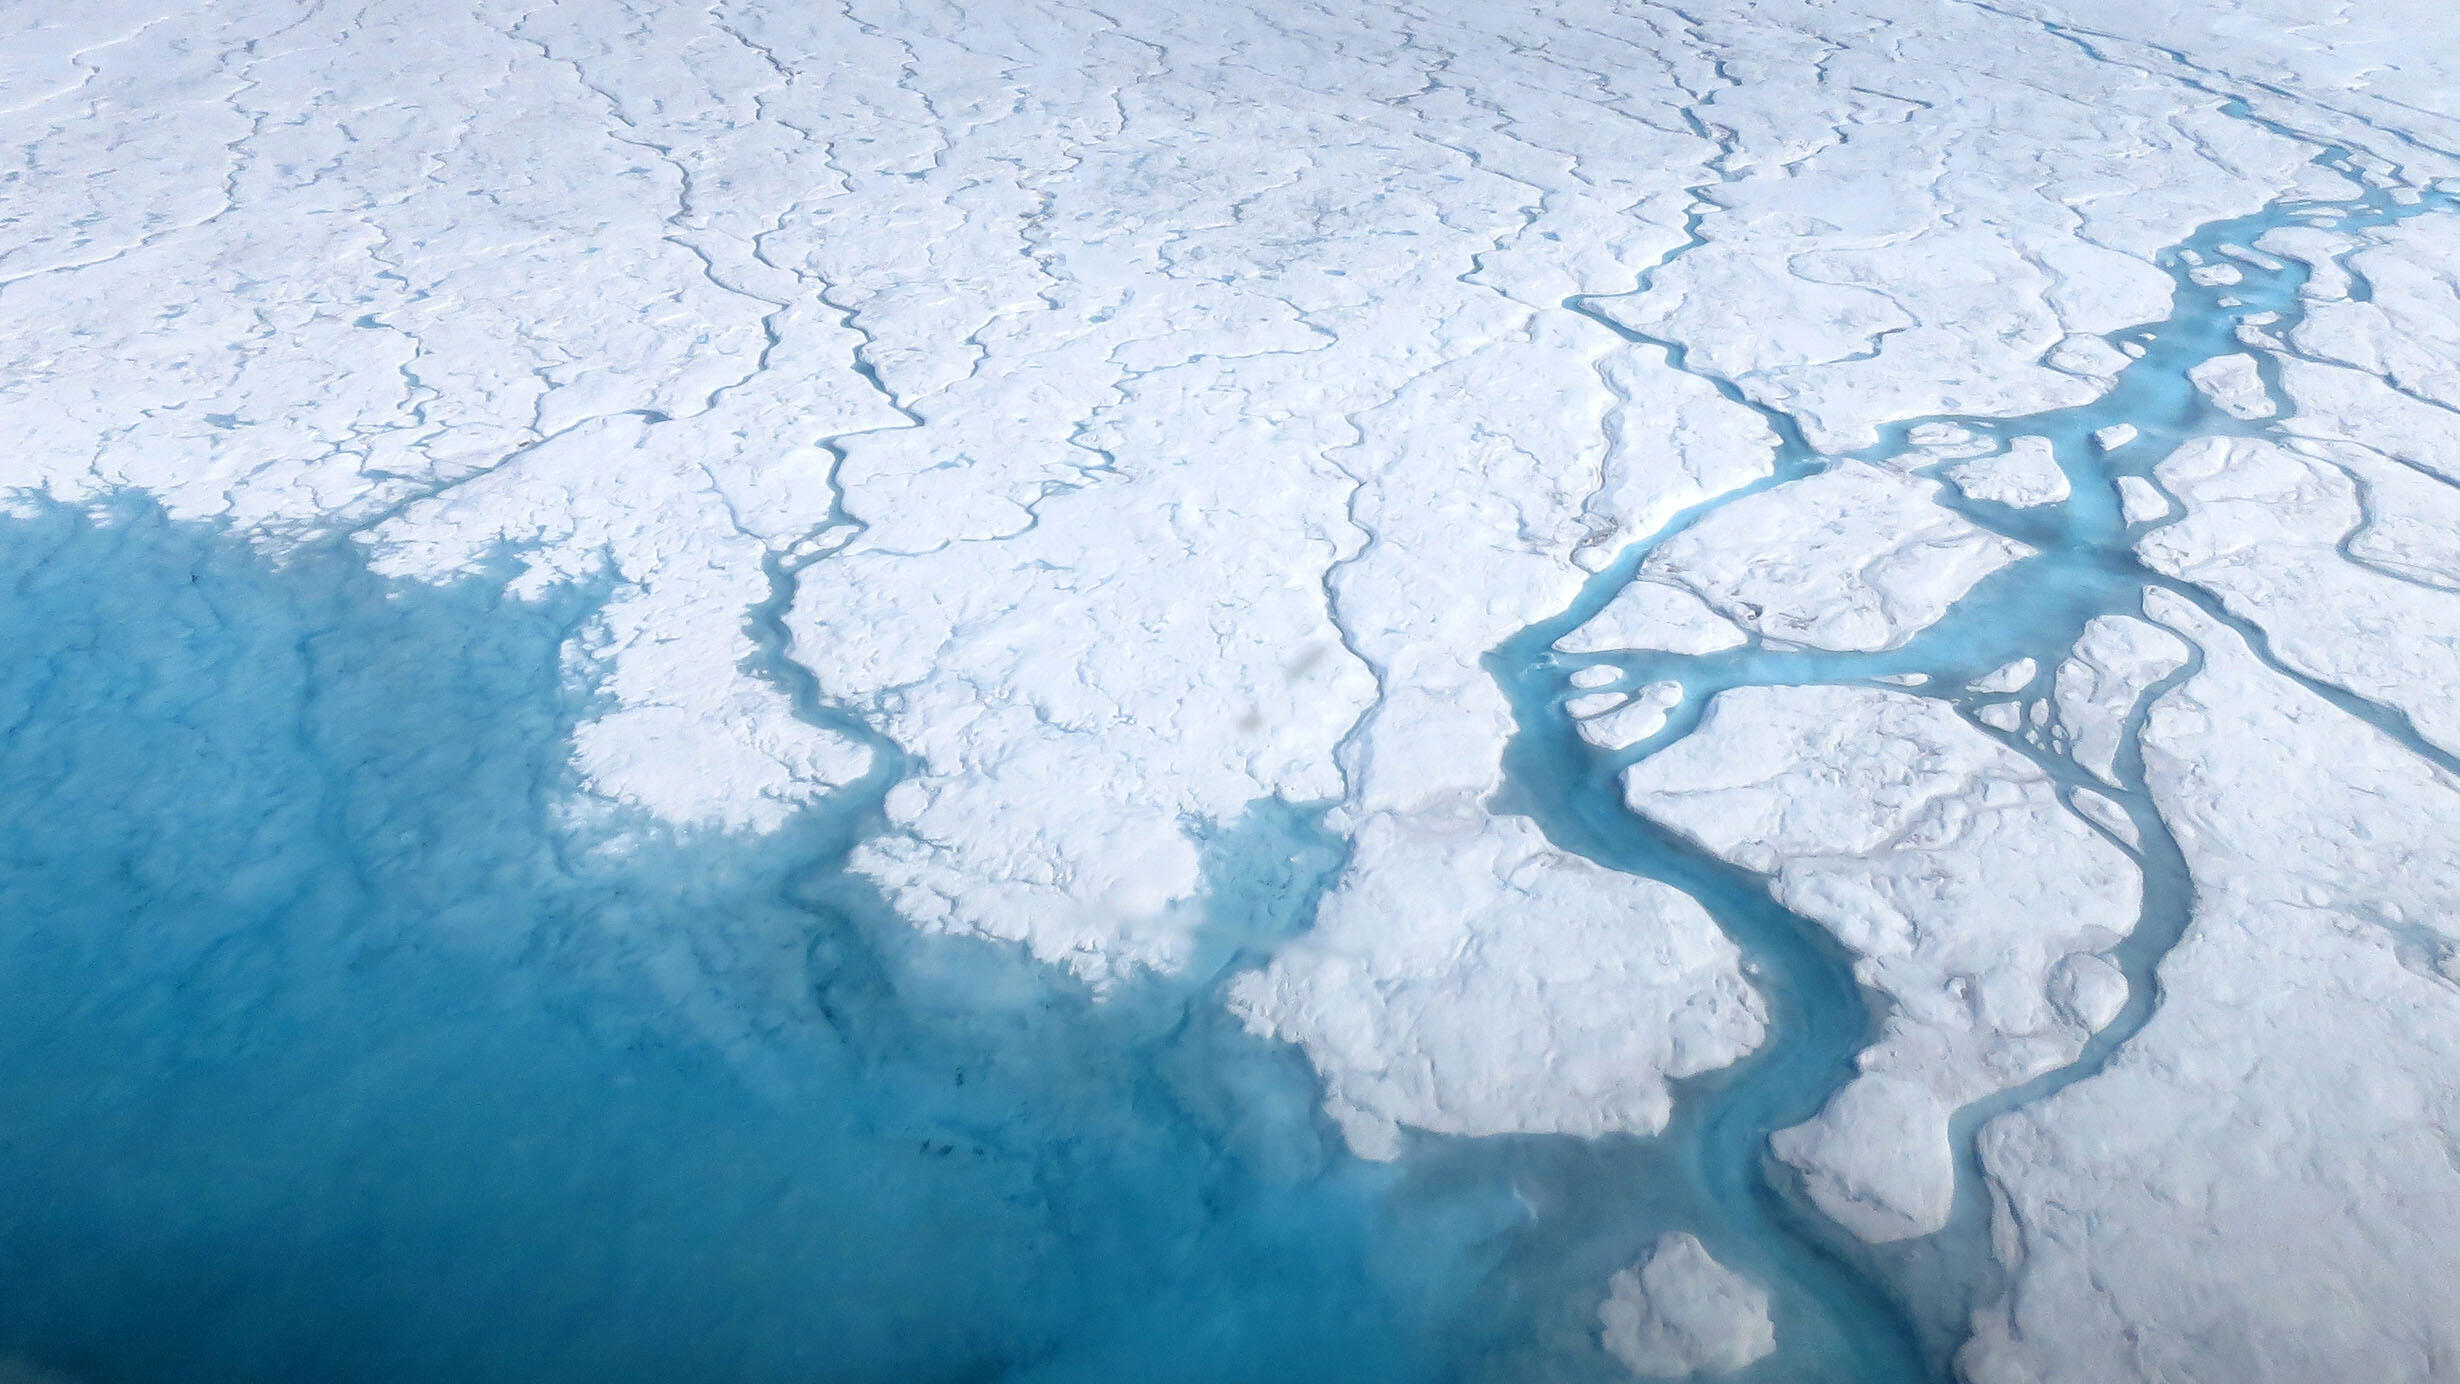 Aerial view of Greenland ice sheet shows rivers and ponds forming on the surface of the ice.